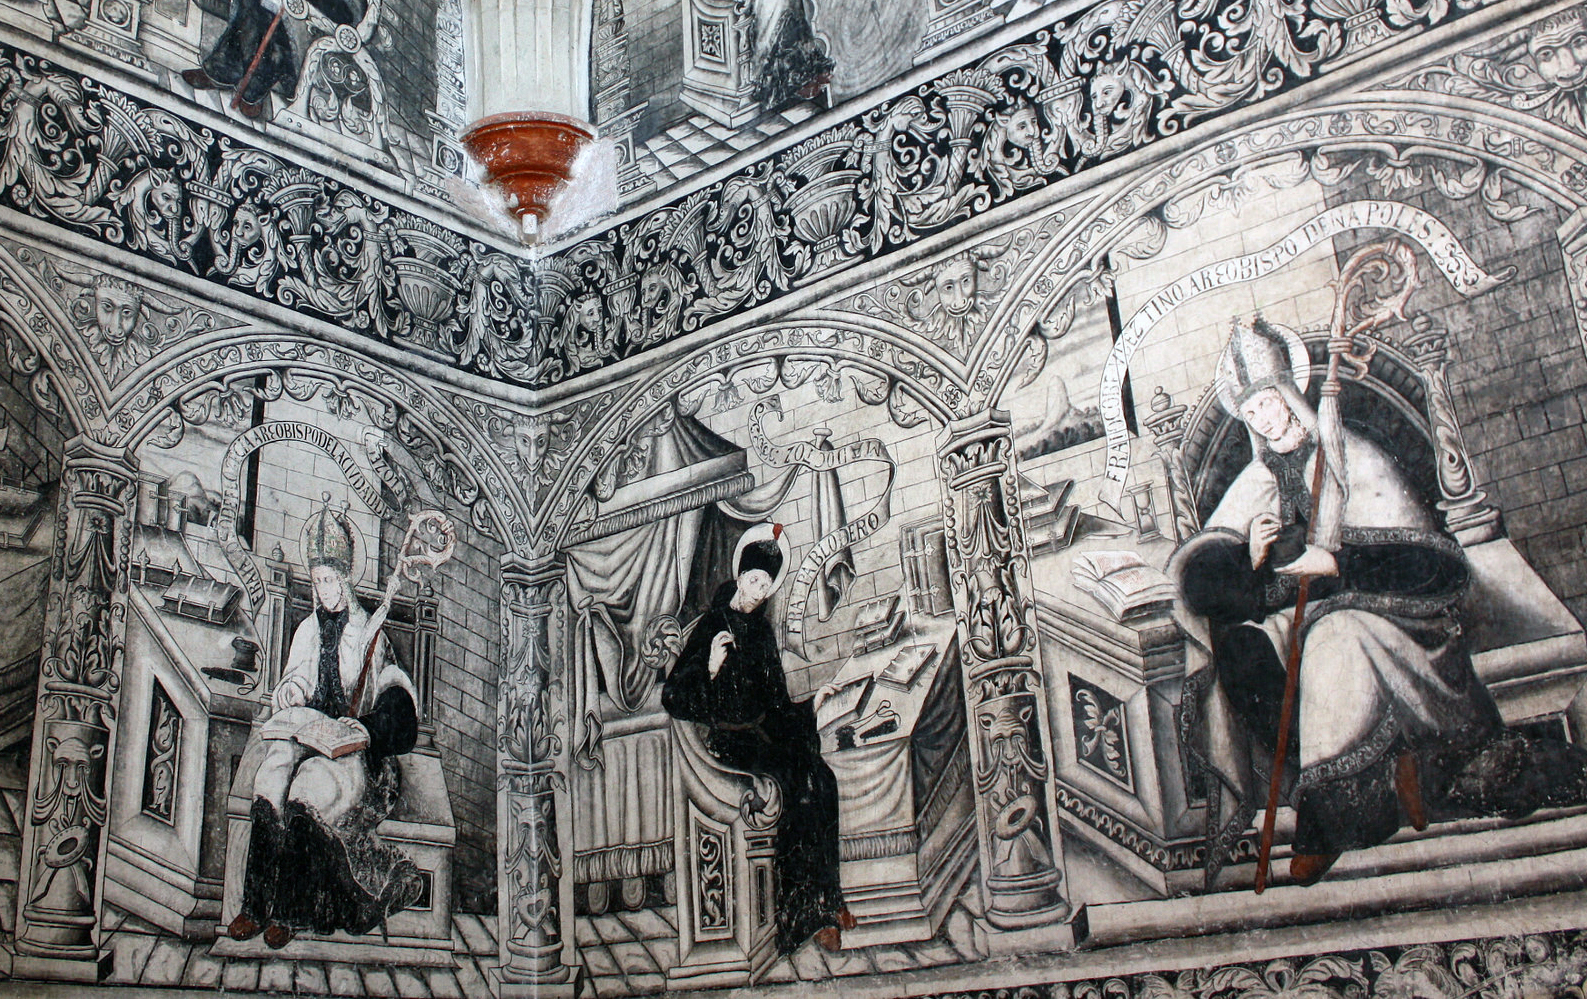 Augustinian heroes (esteemed figures) at desks (detail), stairway murals, Convent of San Nicolás Tolentino, 1546 and after, Actopan, Hidalgo, Mexico (photo: linkogecko, CC BY-NC-ND 2.0)